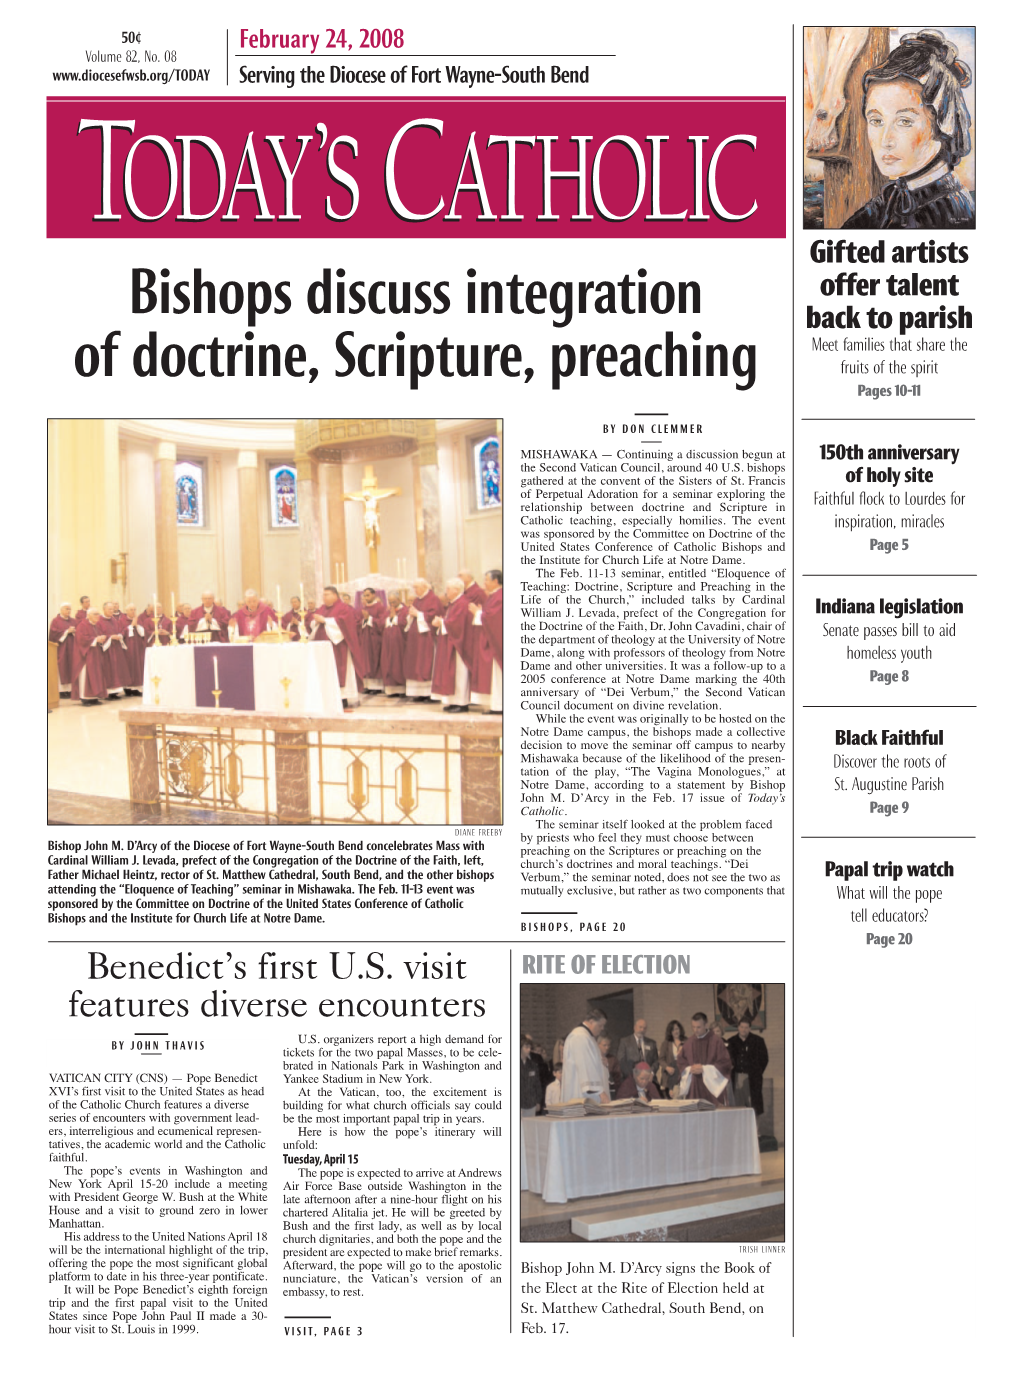 Bishops Discuss Integration of Doctrine, Scripture, Preaching